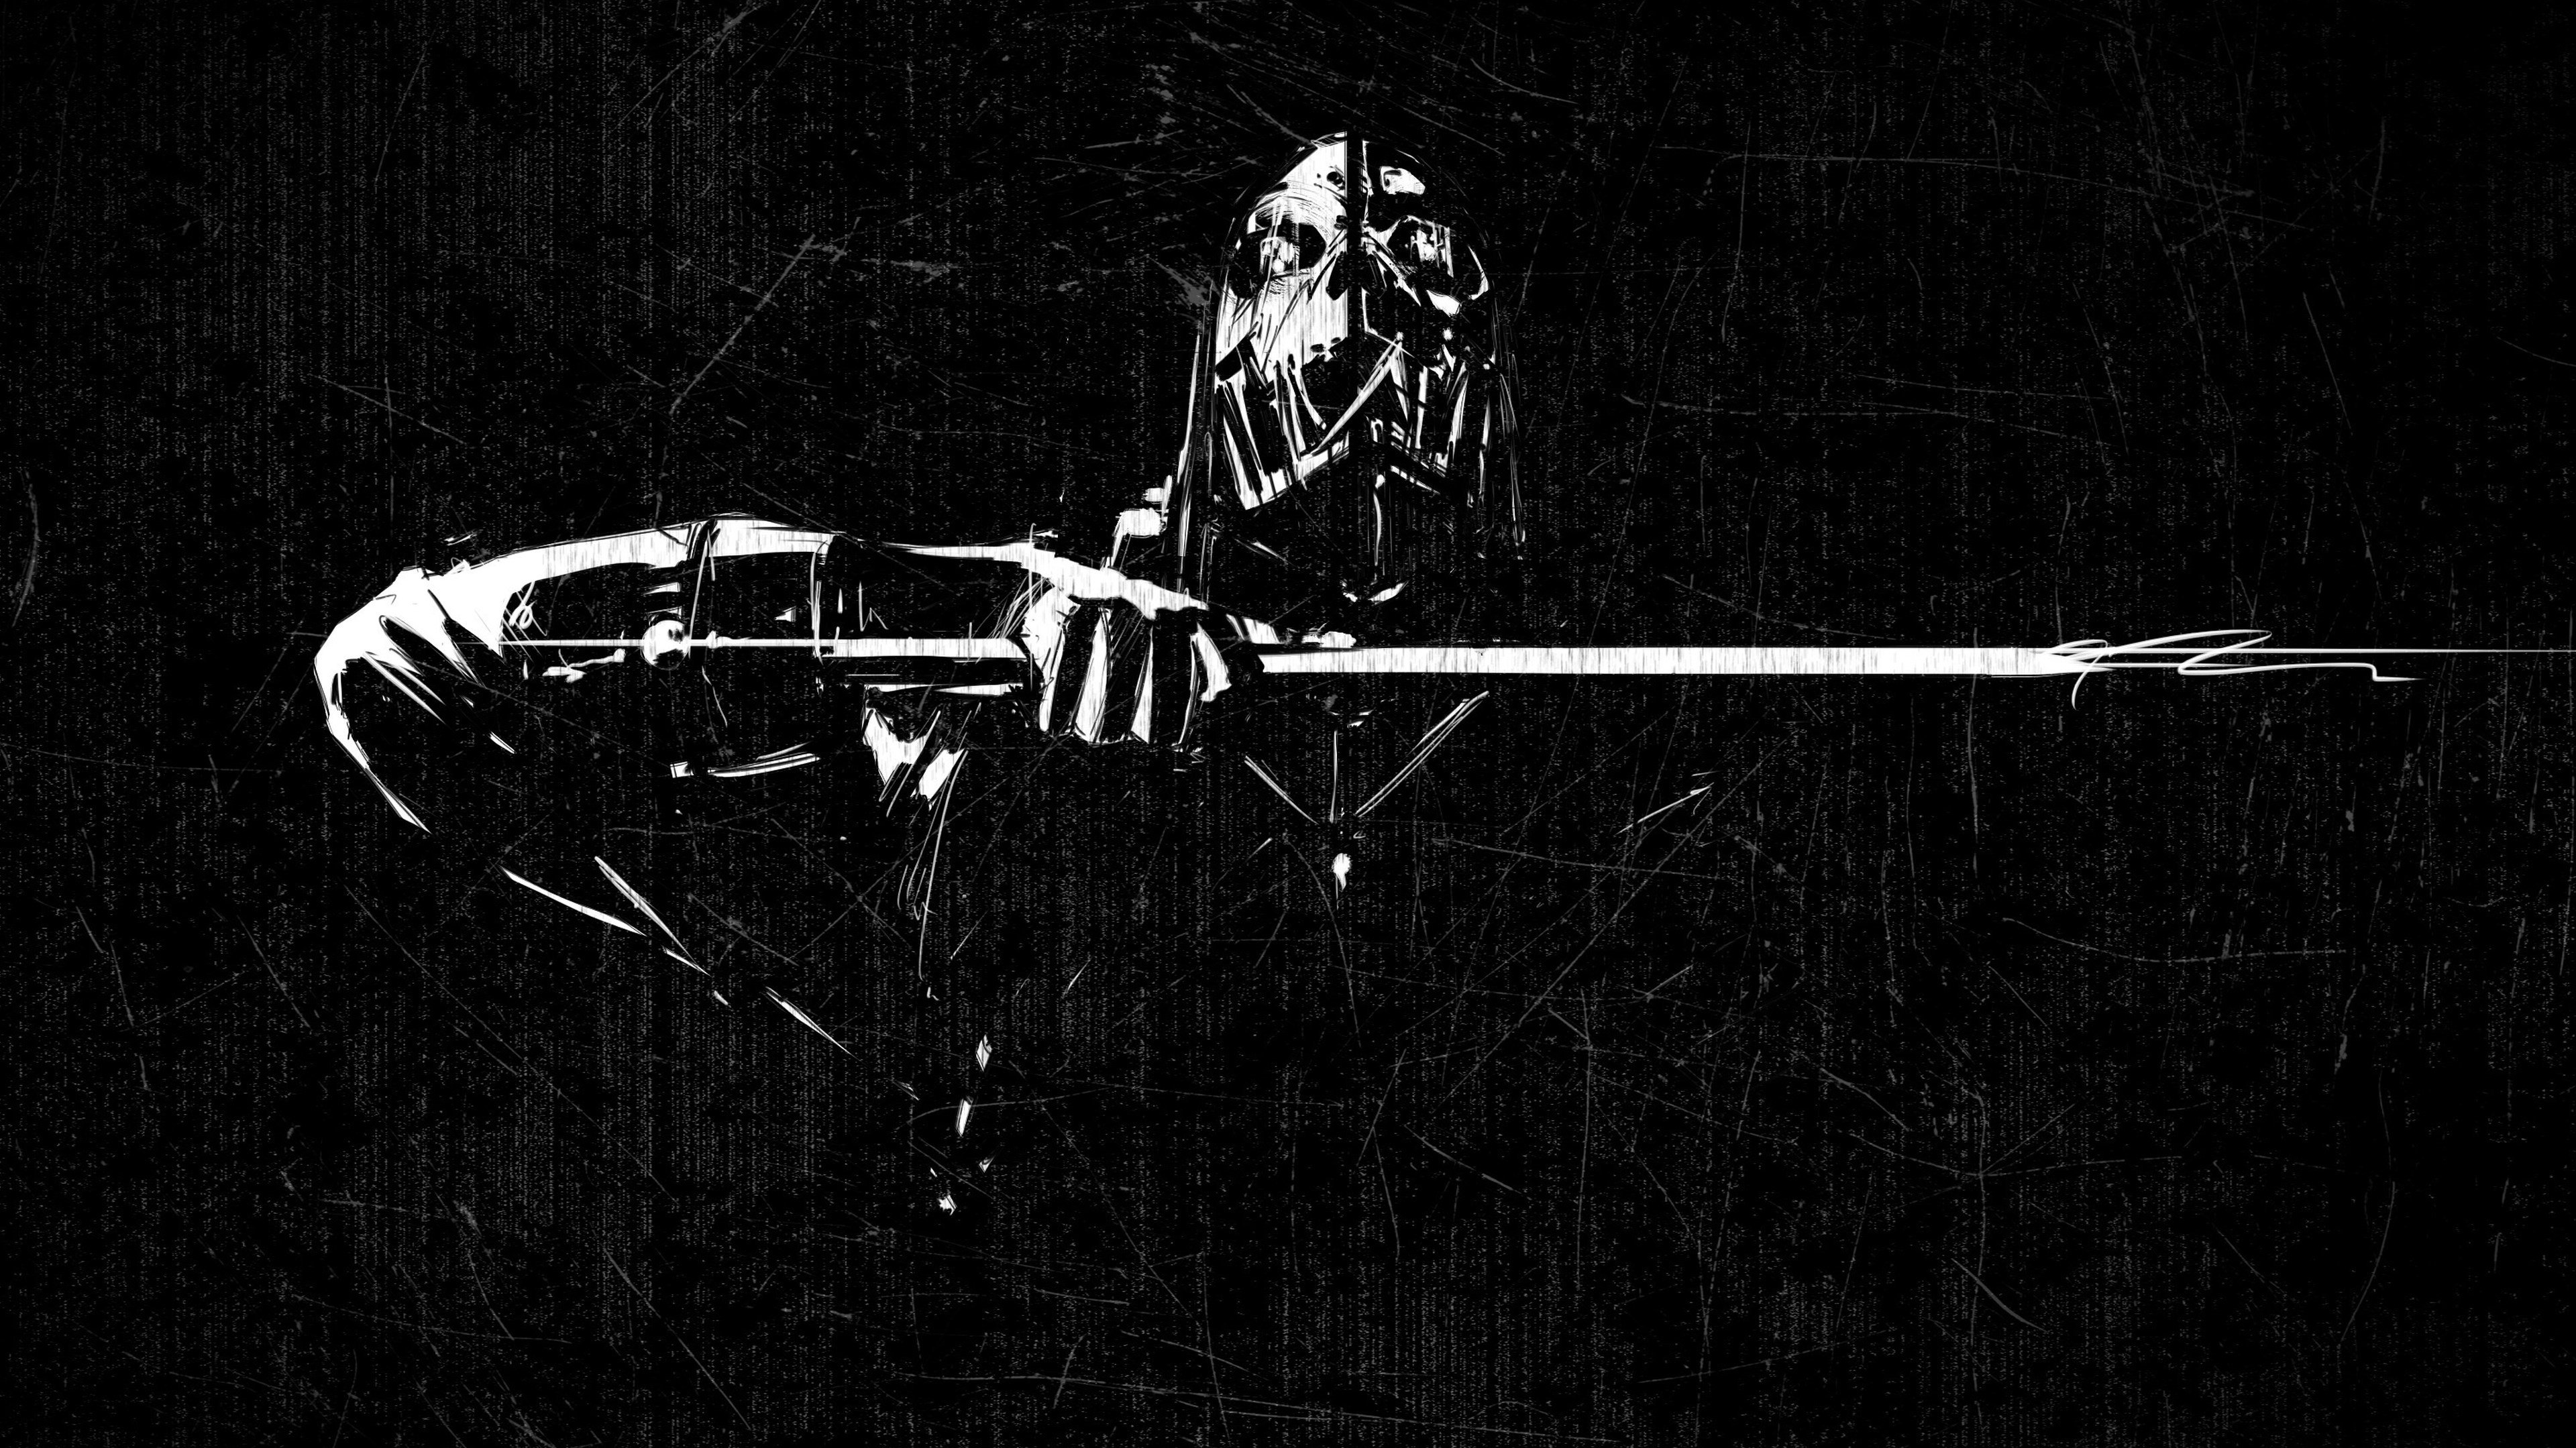 Free download dishonored 4k ultra HD wallpaper High quality walls [3840x2159] for your Desktop, Mobile & Tablet. Explore Dishonored 4K WallpaperK Wallpaper, Wallpaper 4K, 4K Wallpaper